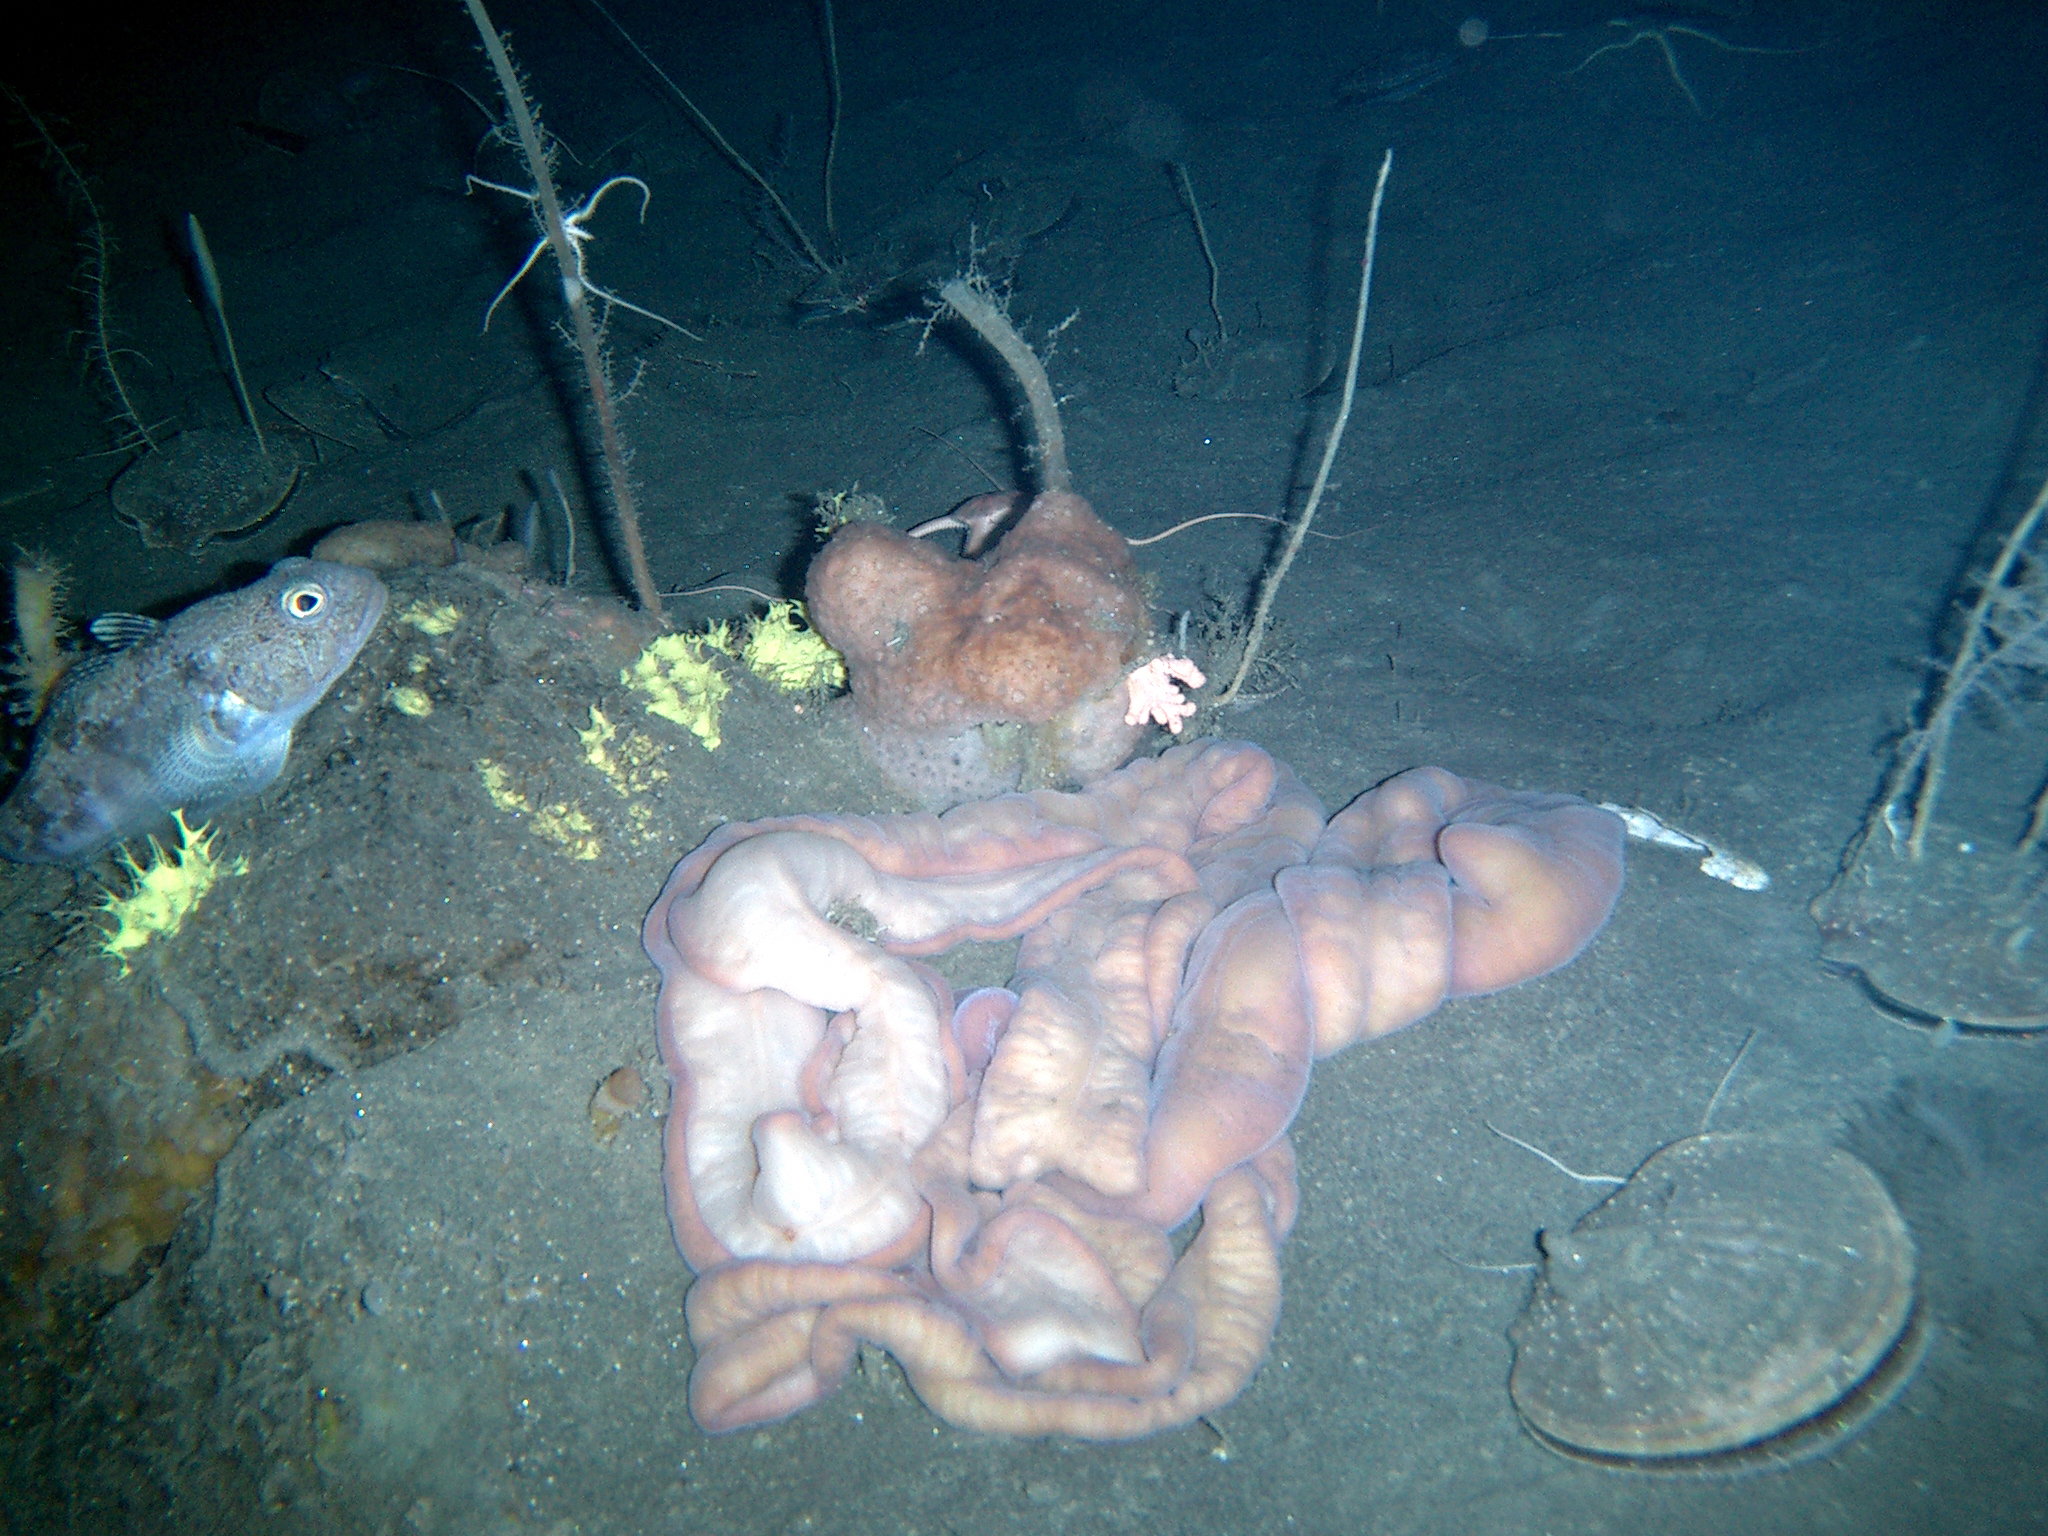 Worm-like forms on the ocean floor.